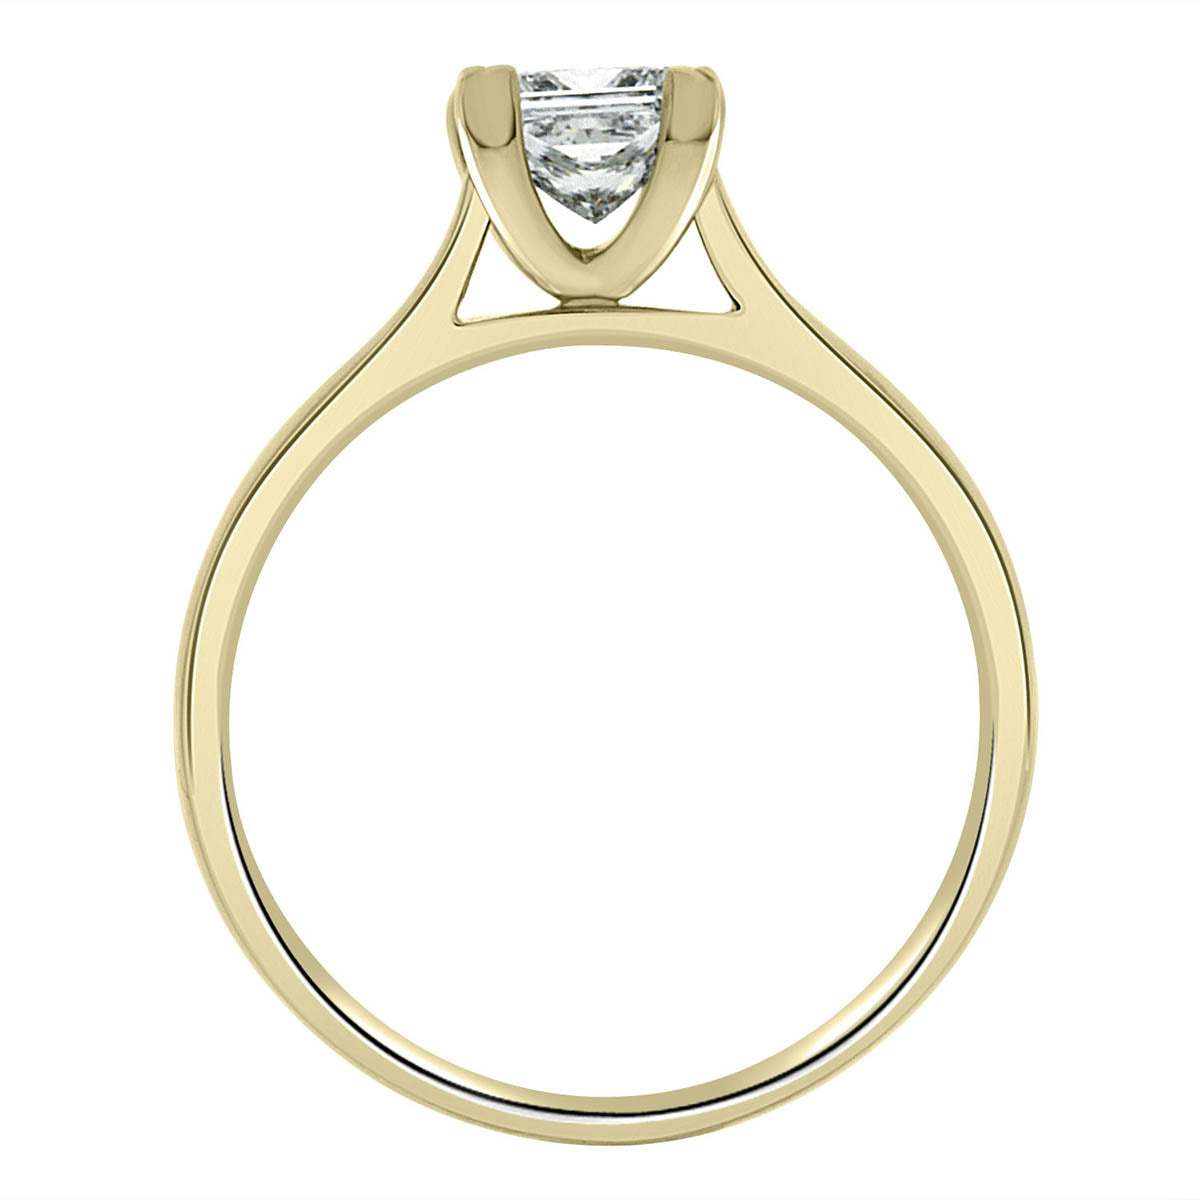 Princess Cut Solitaire engagement ring in yellow gold standing upright